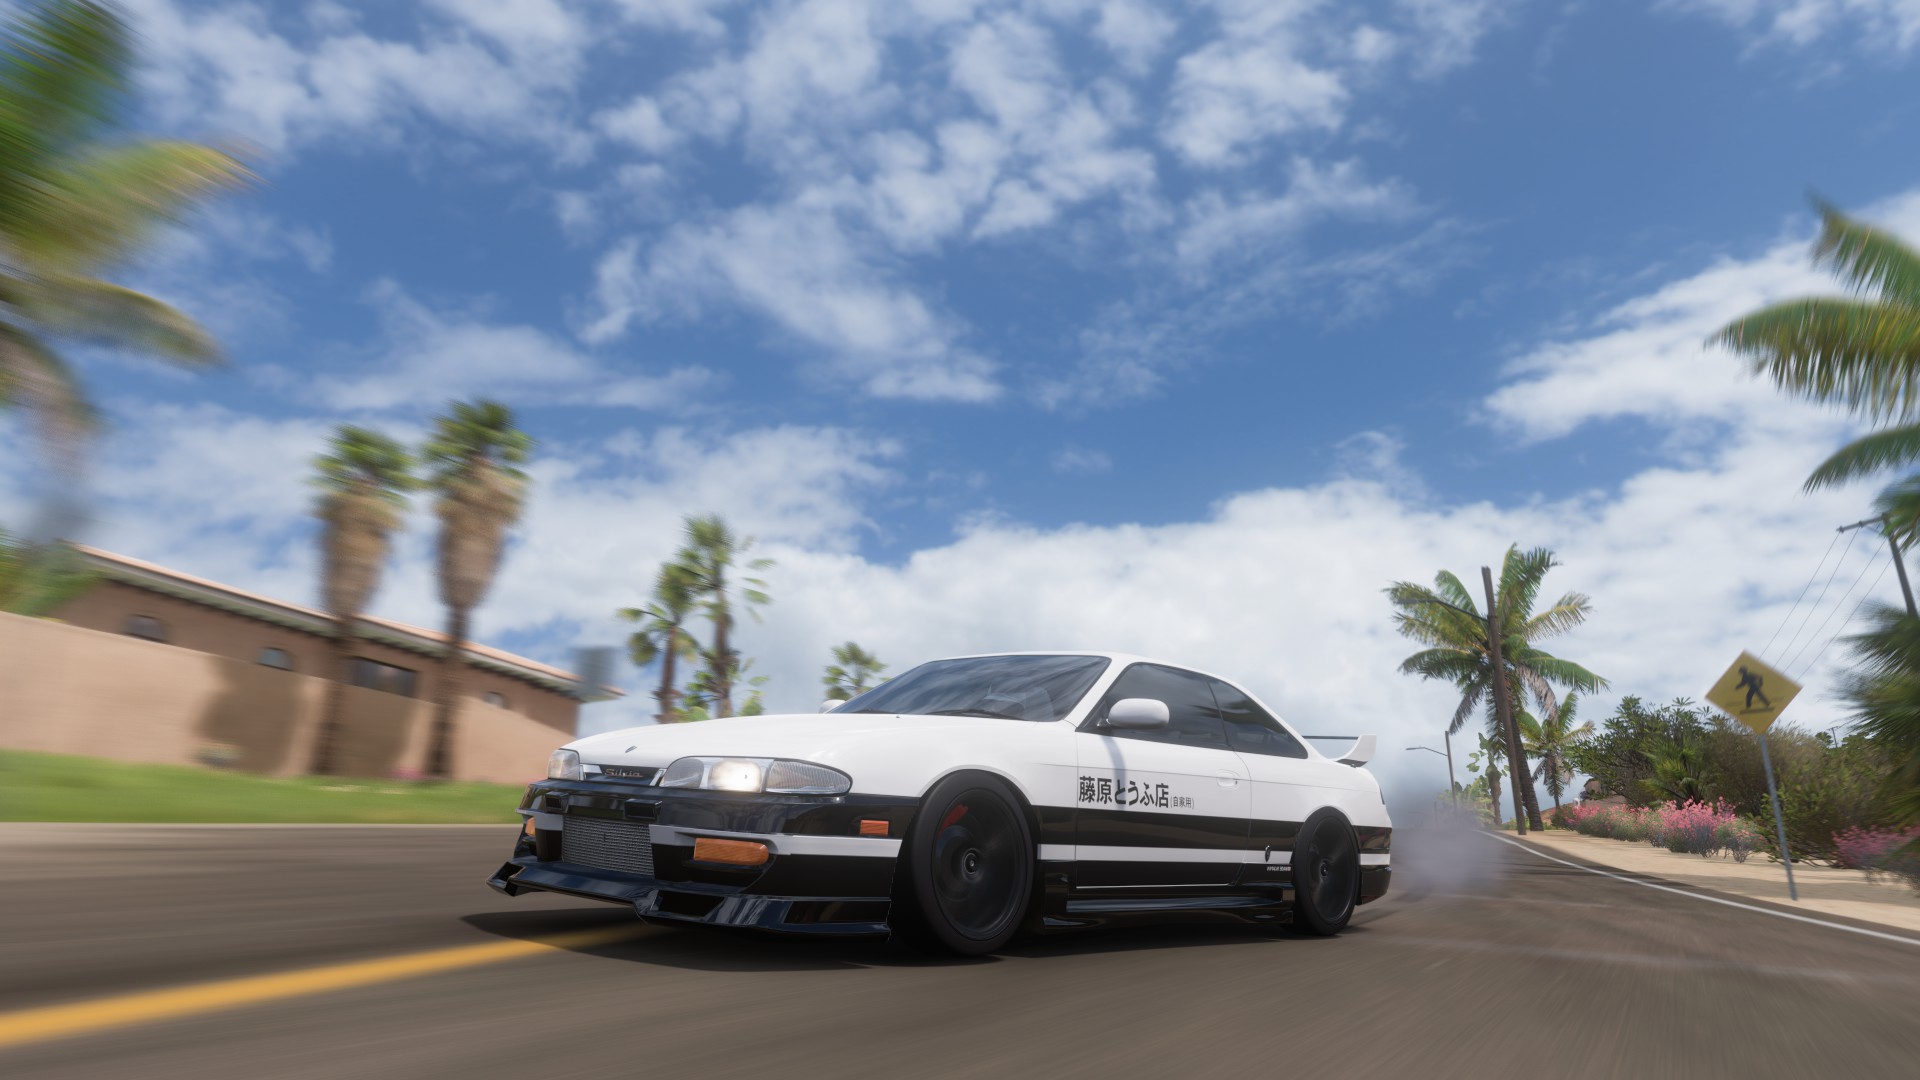 General 1920x1080 Initial D Nissan Silvia S14 Forza Horizon 5 Nissan Japanese cars video games PlaygroundGames sky clouds frontal view video game art CGI motion blur palm trees signs headlights